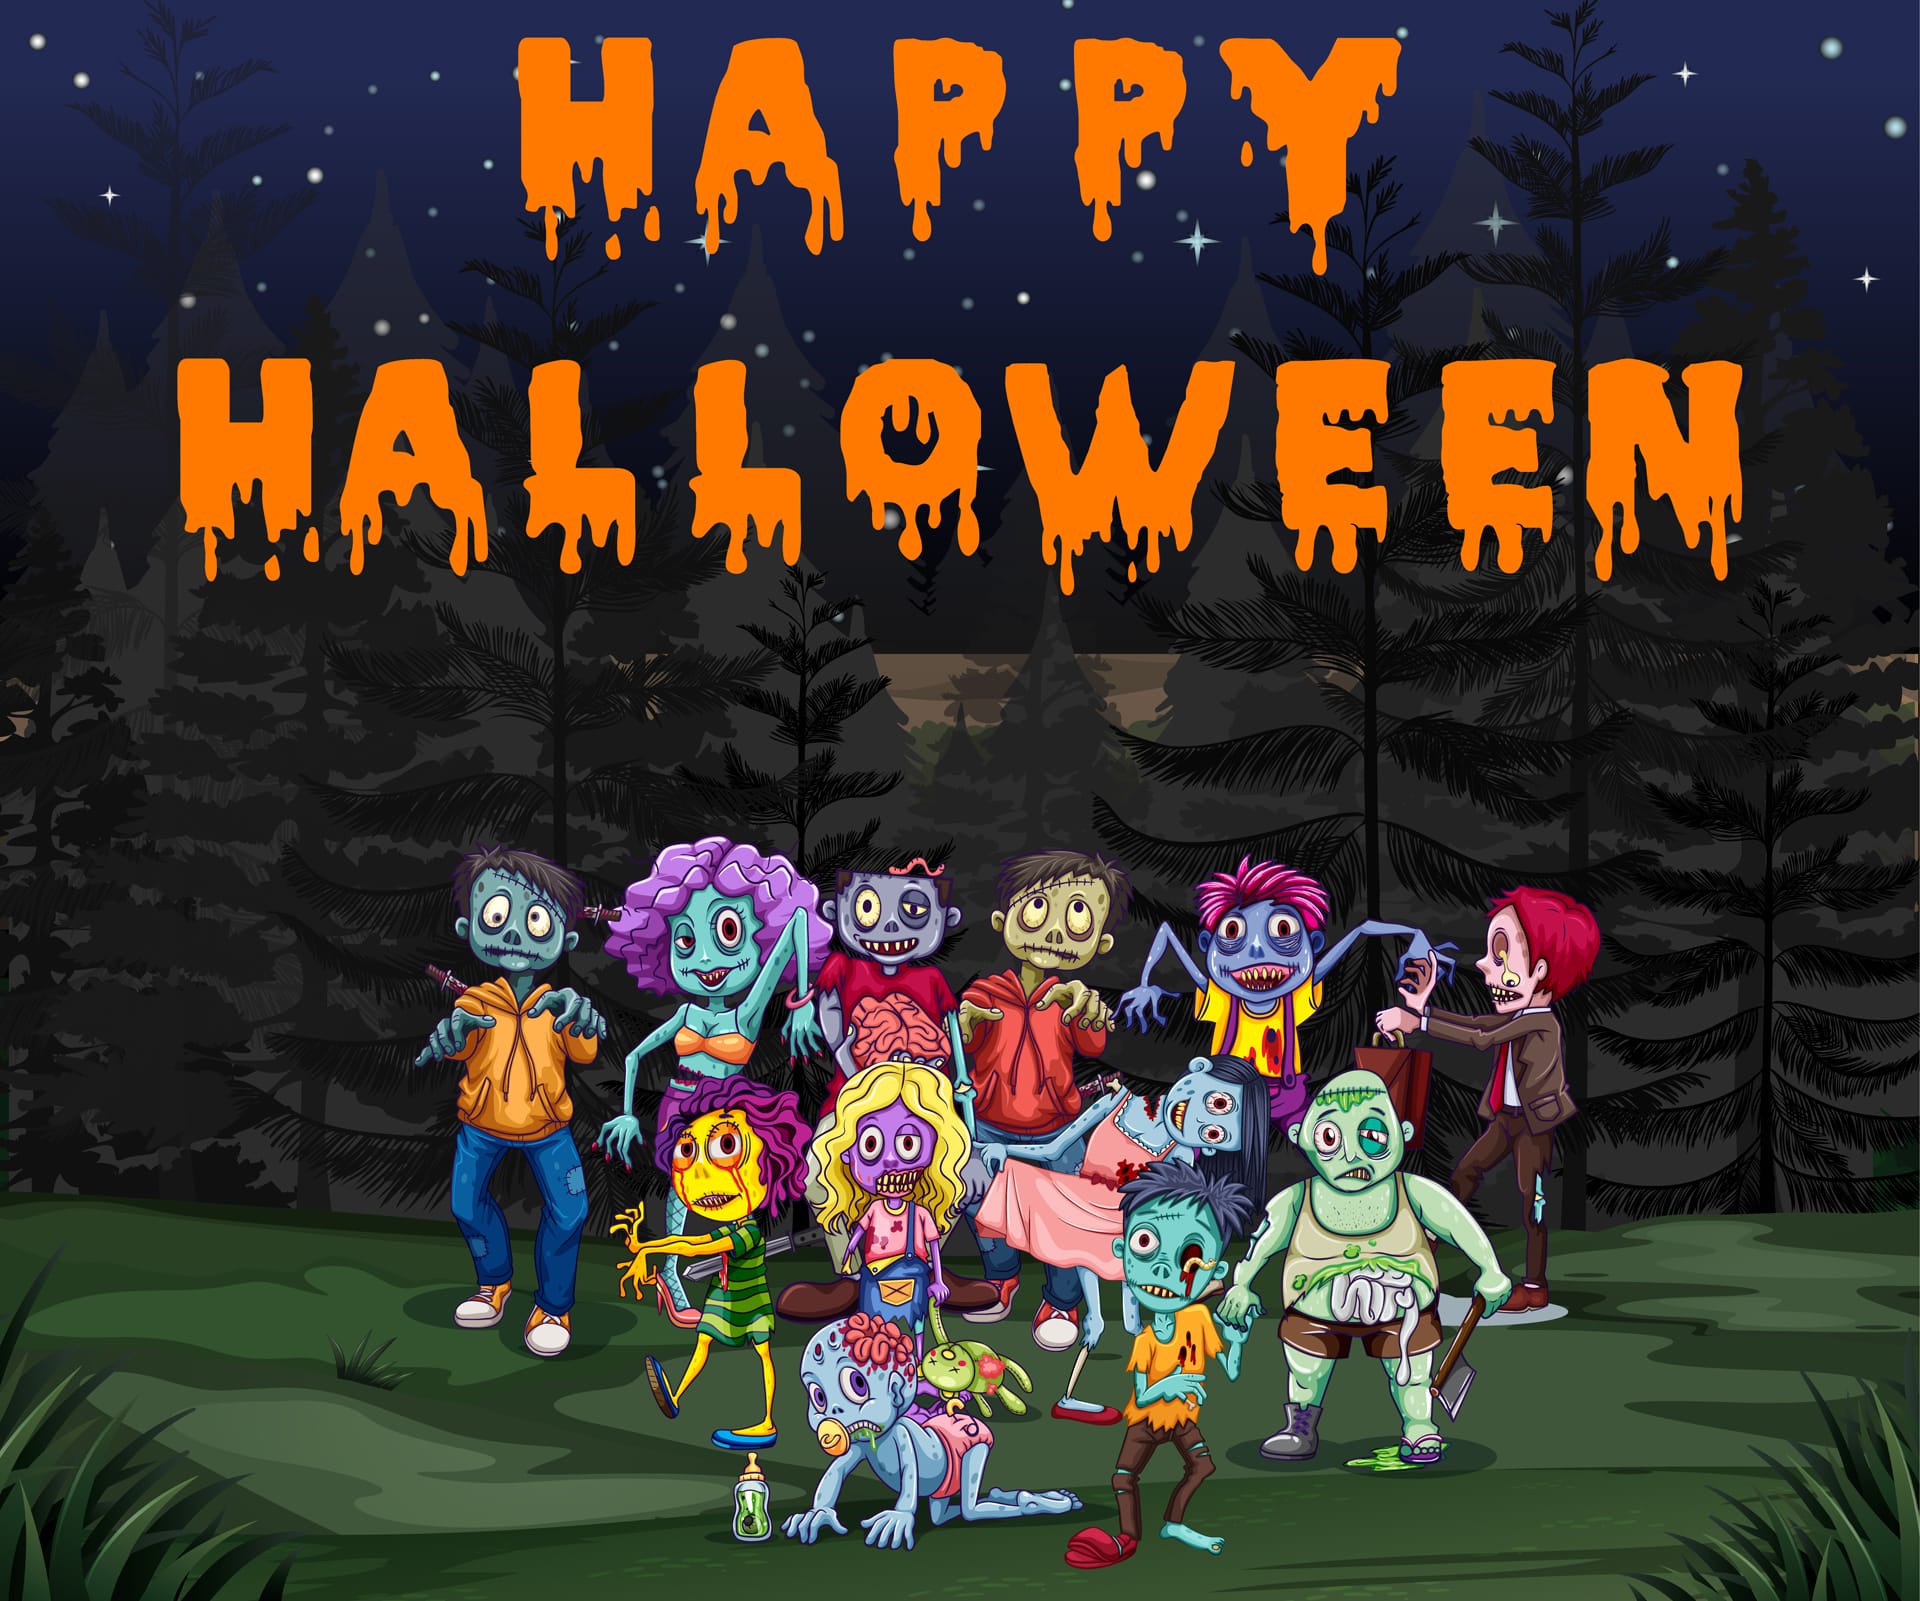 Halloween theme with zombies park